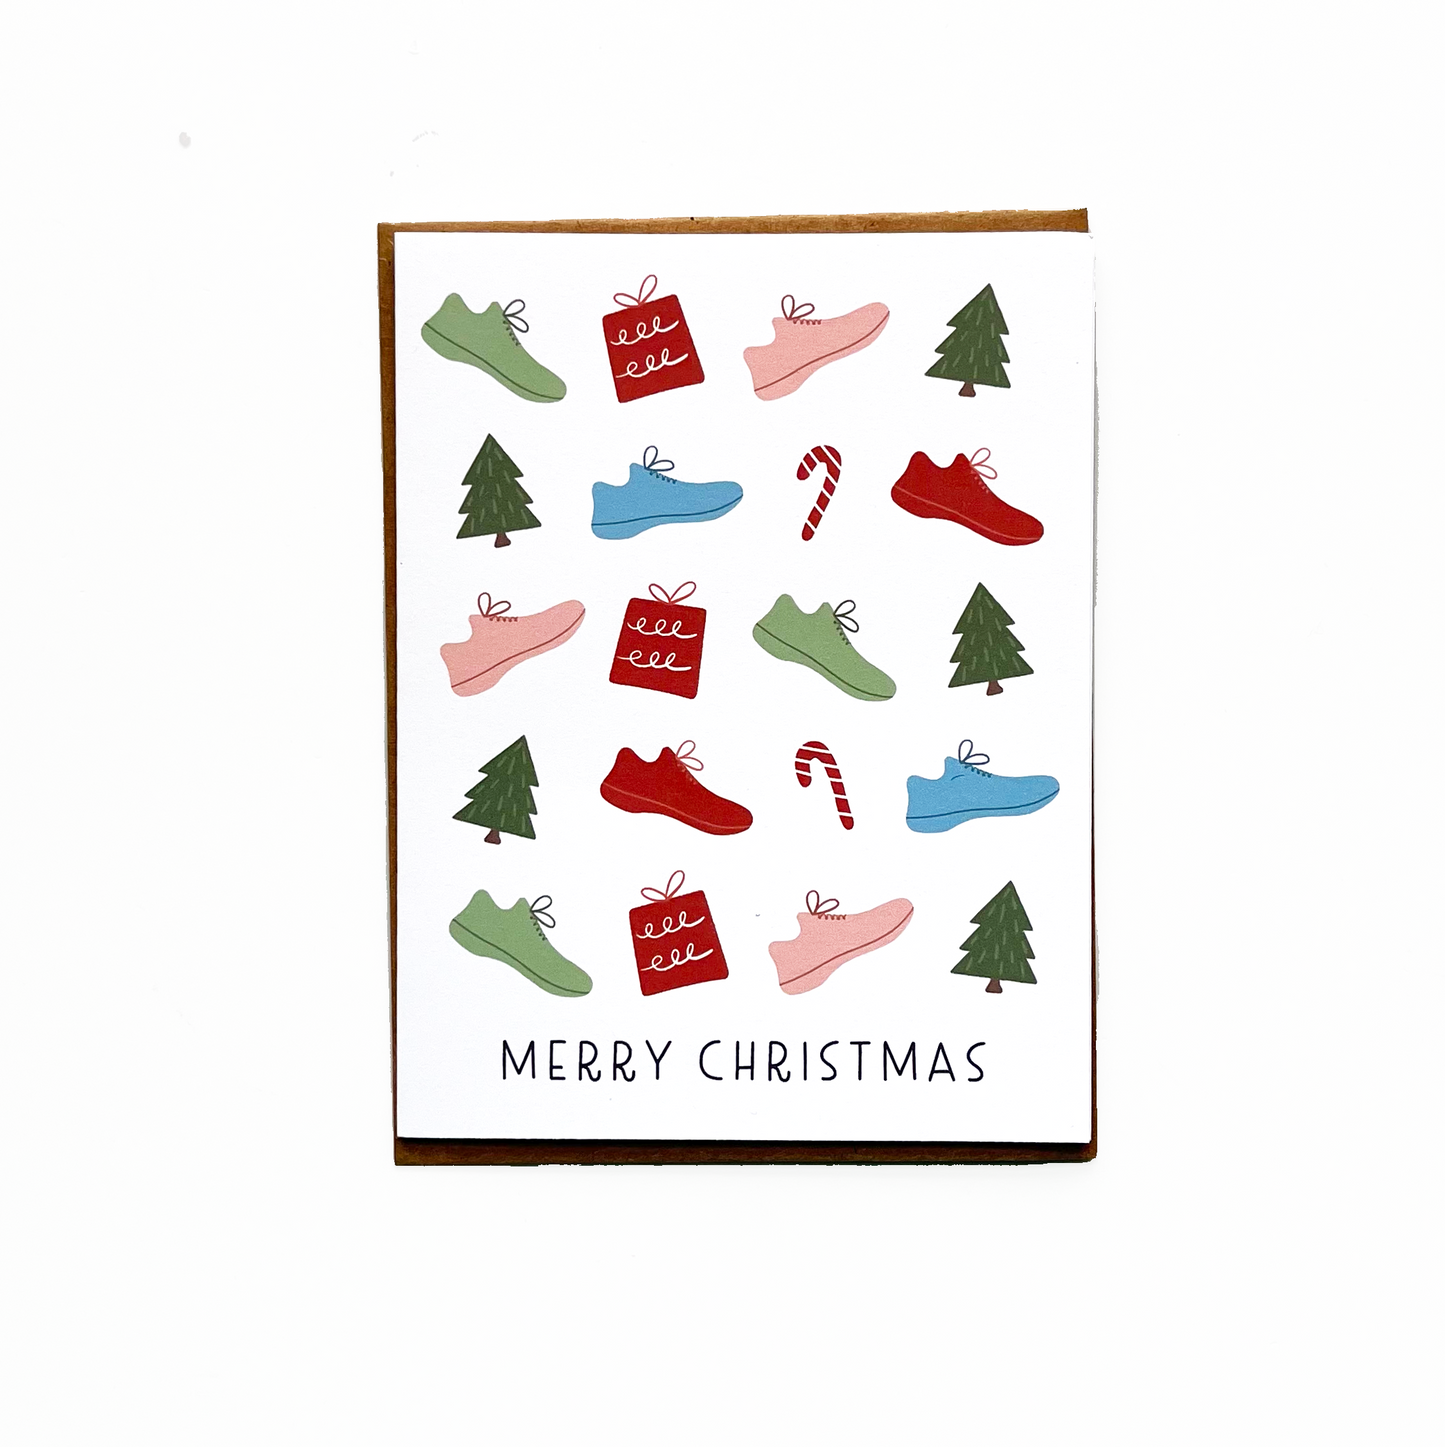 Merry Christmas written on bottom of card with alternating runner shoe, present, tree and candy cane